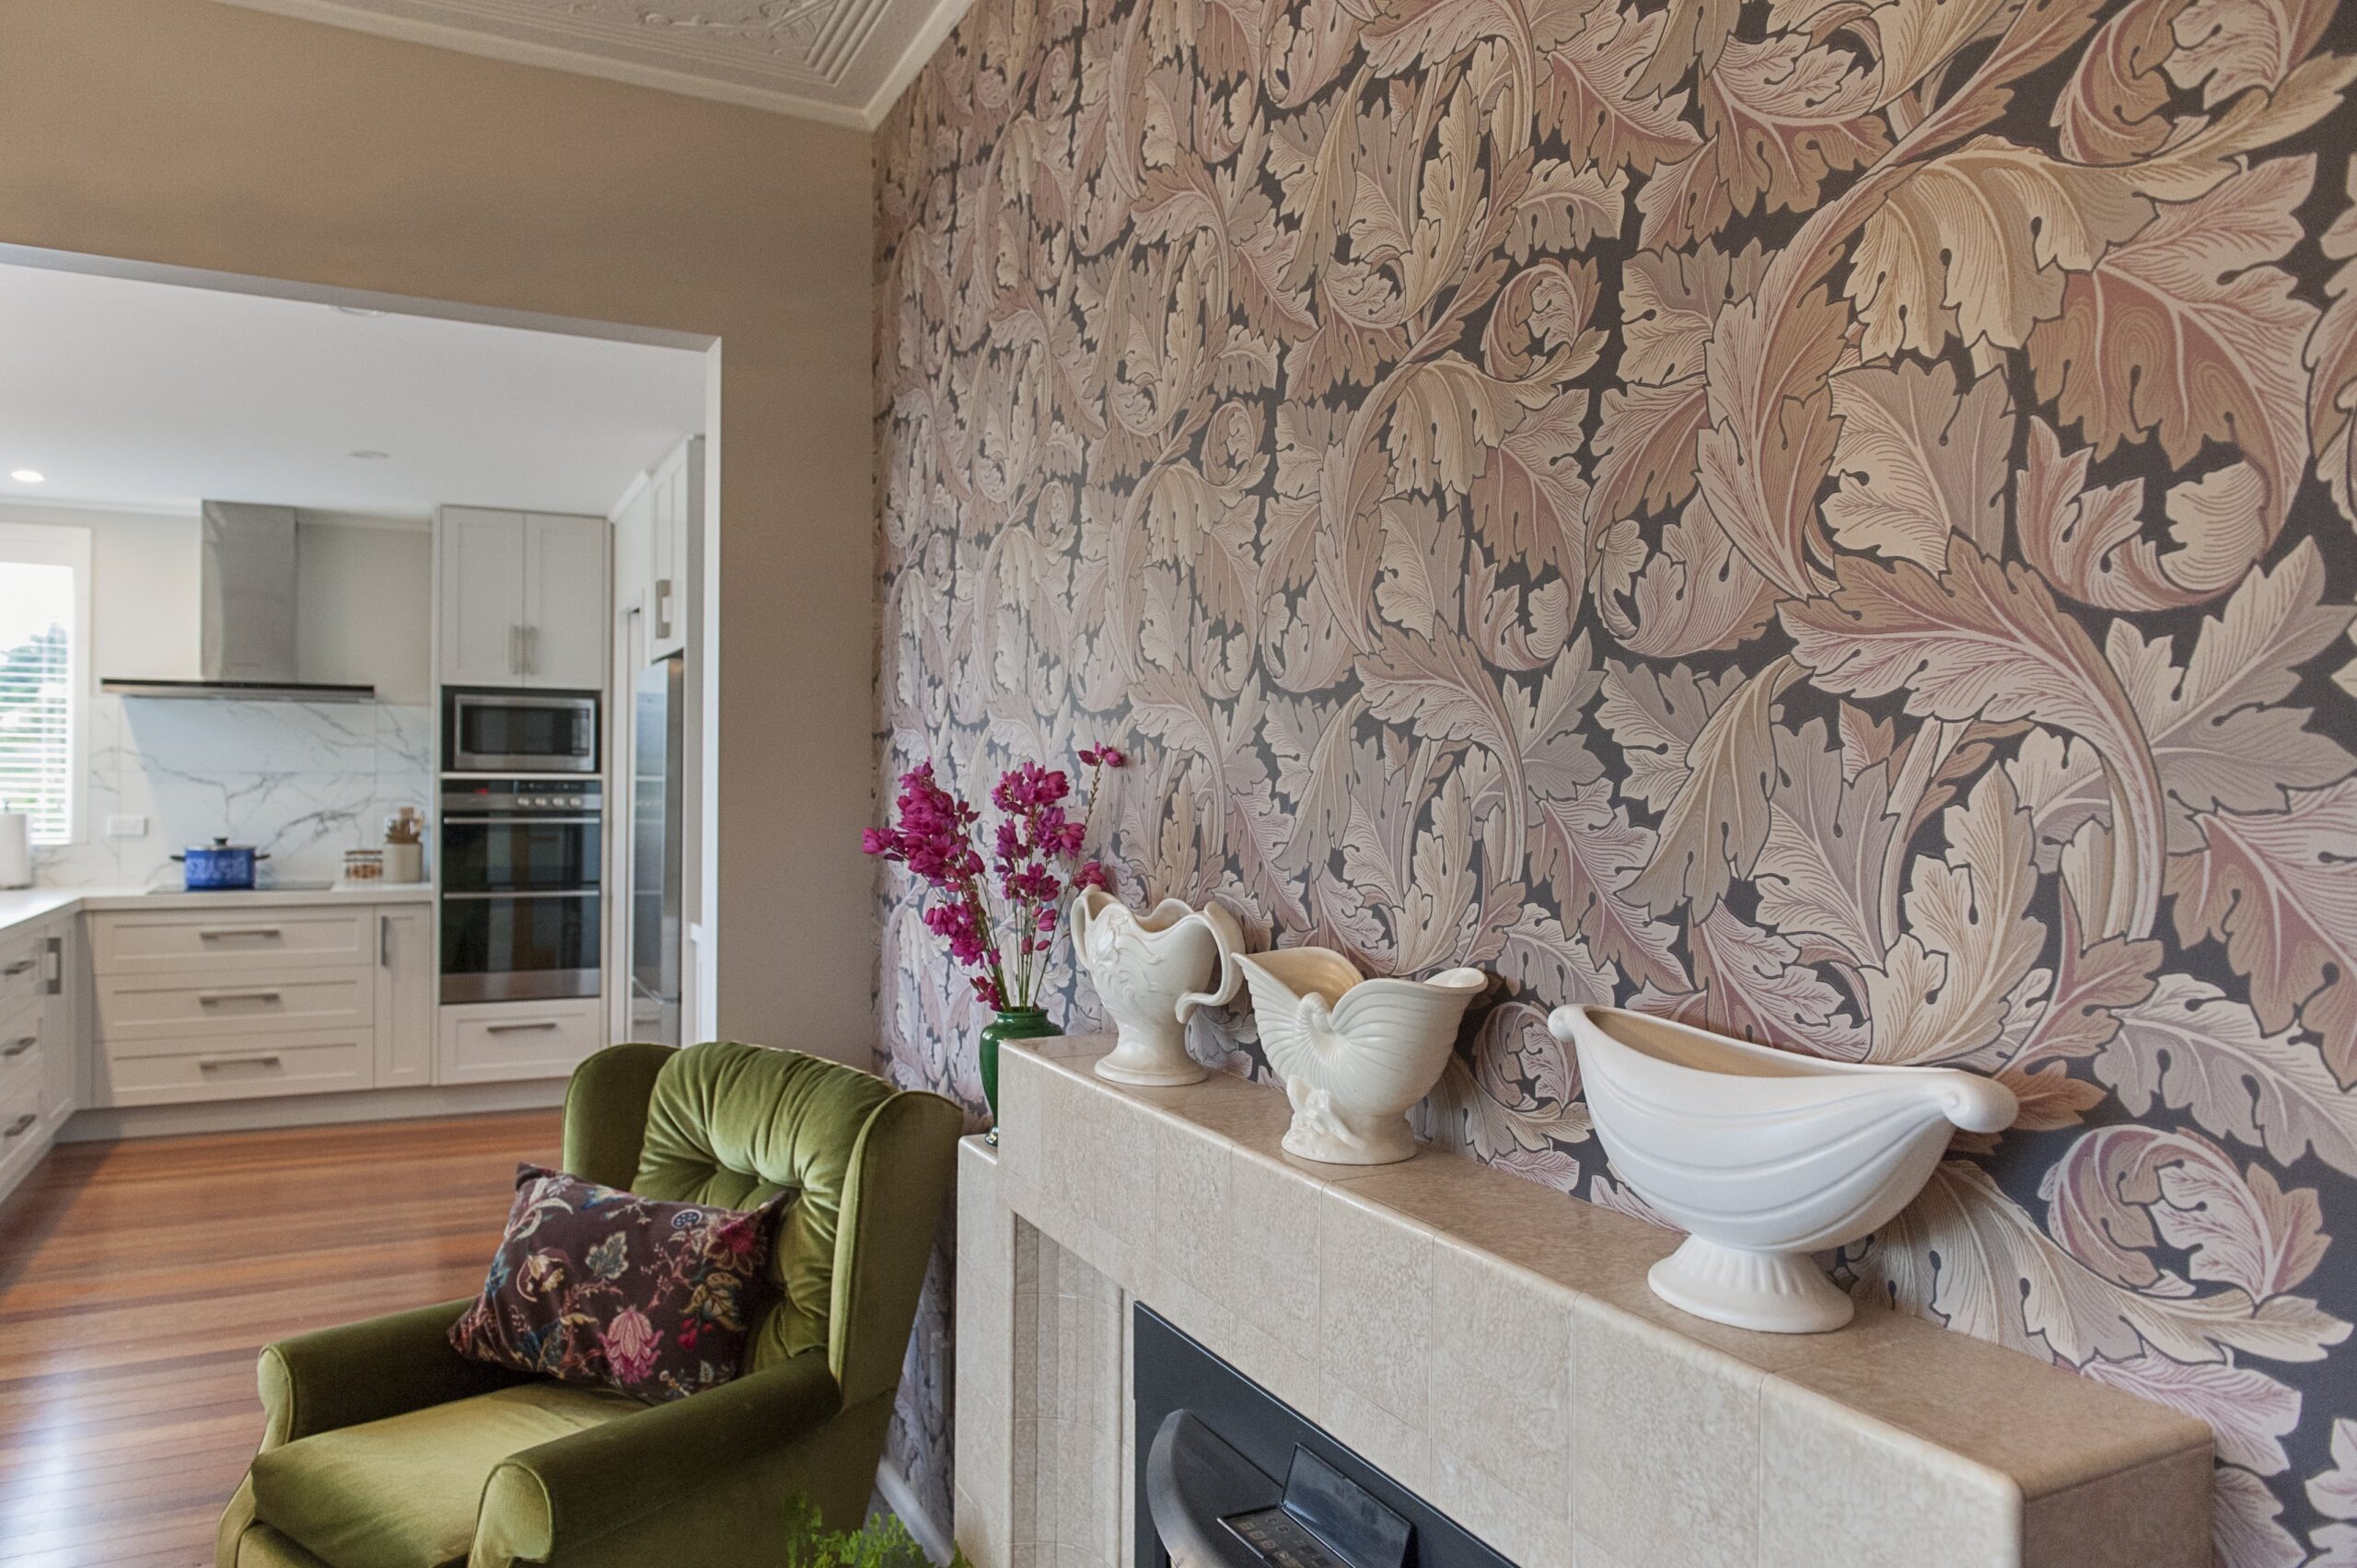  Dining room with art deco fireplaces and William Morris feature wallpaper